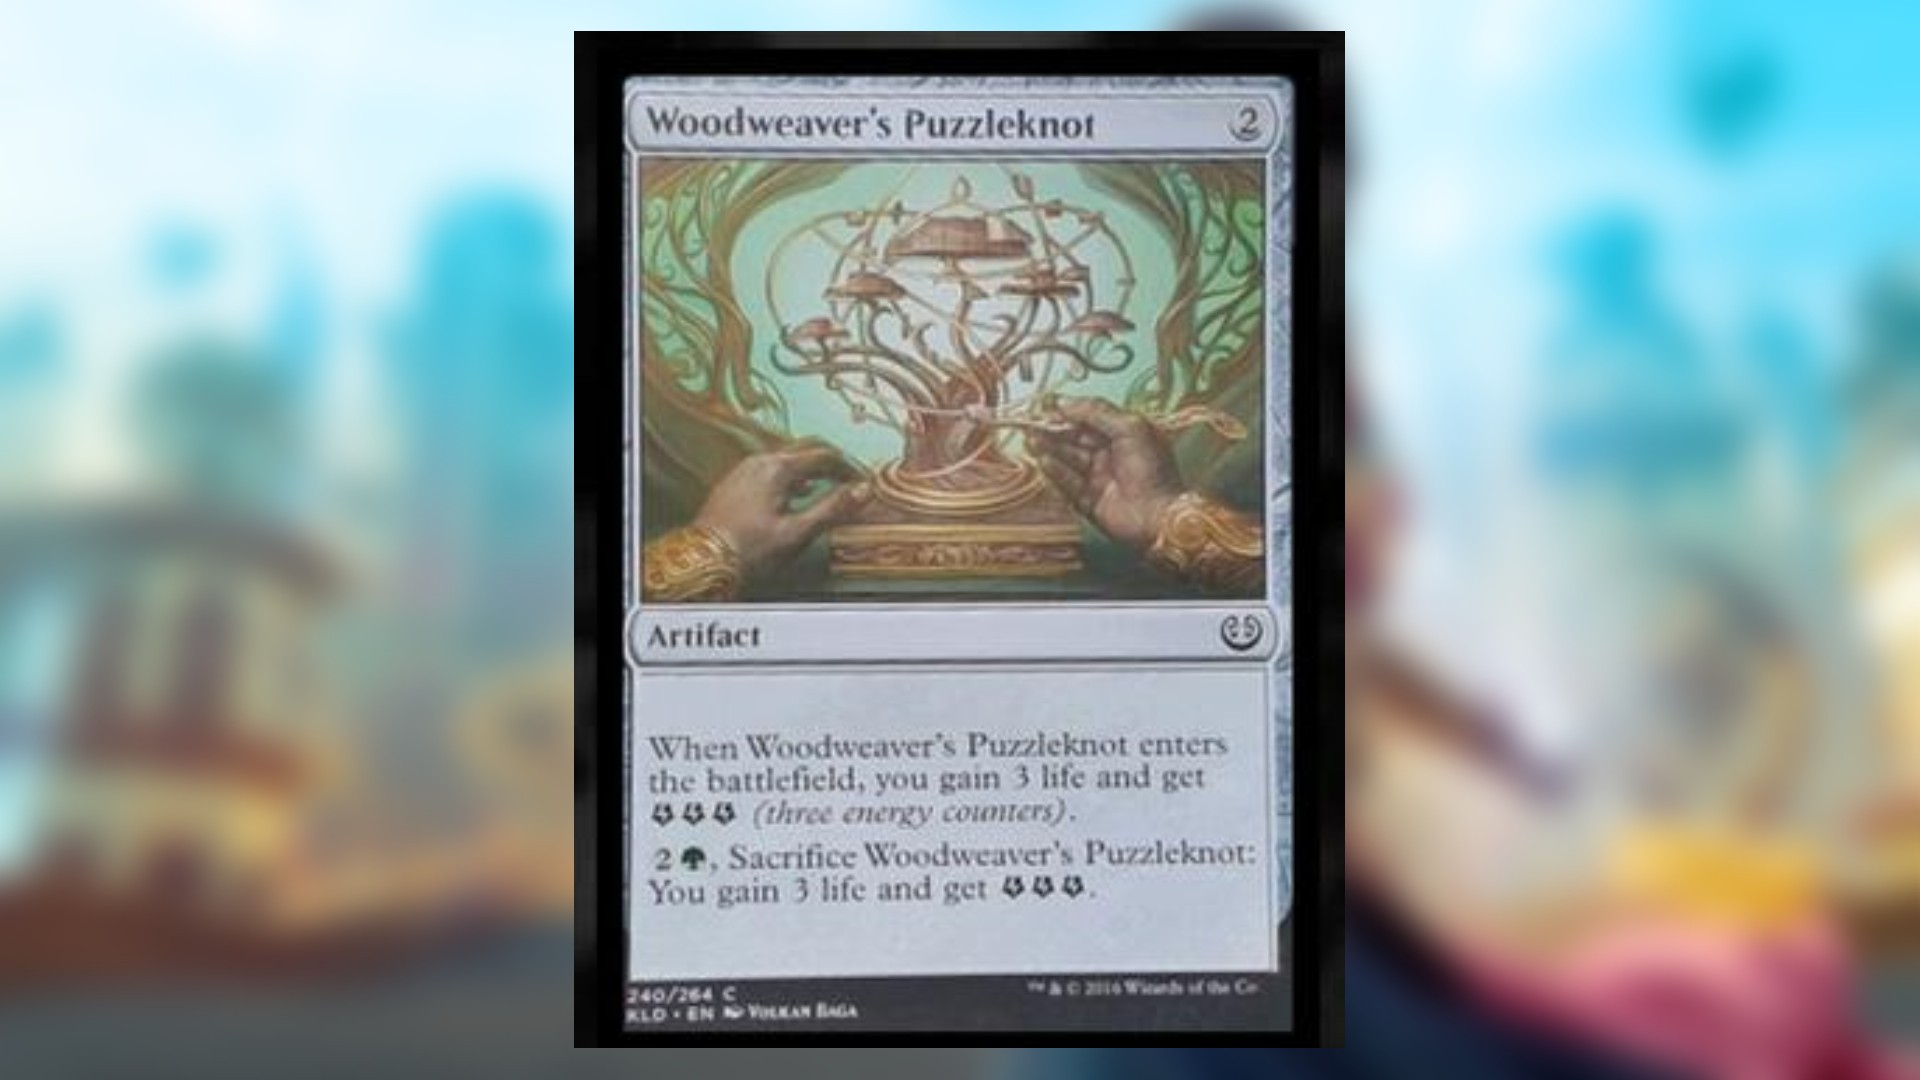 magic the gathering card with no color and art depicting a wooden contraption that is a cross between a scultpure and puzzle